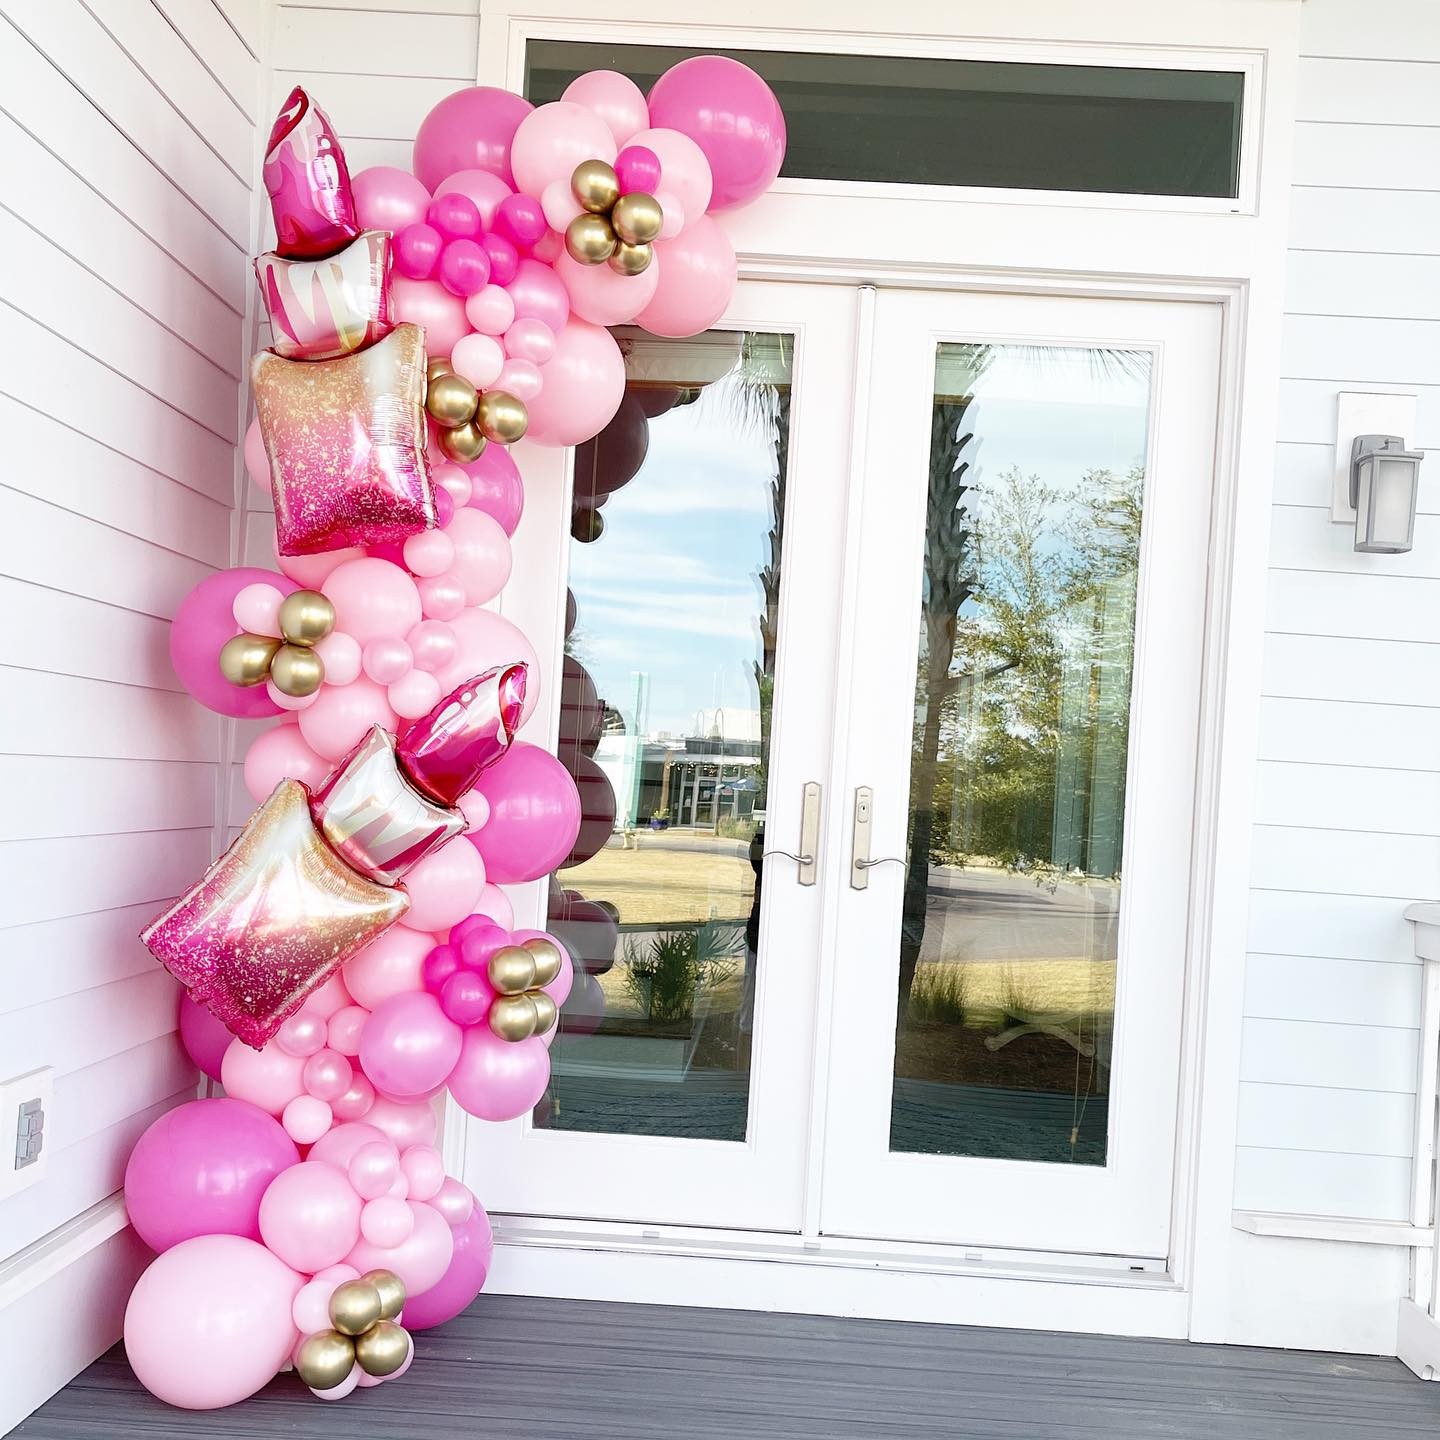 Let’s go girls! 💄👄 

Featuring:
9 ft deluxe garland + foil add ons

 
#lipstickballoons #bacheloretteparty #bachparty #30abachelorette #pinkballoons #girlsweekend #spaparty #balloongarland #balloons #organicballoongarland #balloonboutique #balloonartist #balloonstylist #partystylist #letsgogirls #instalove